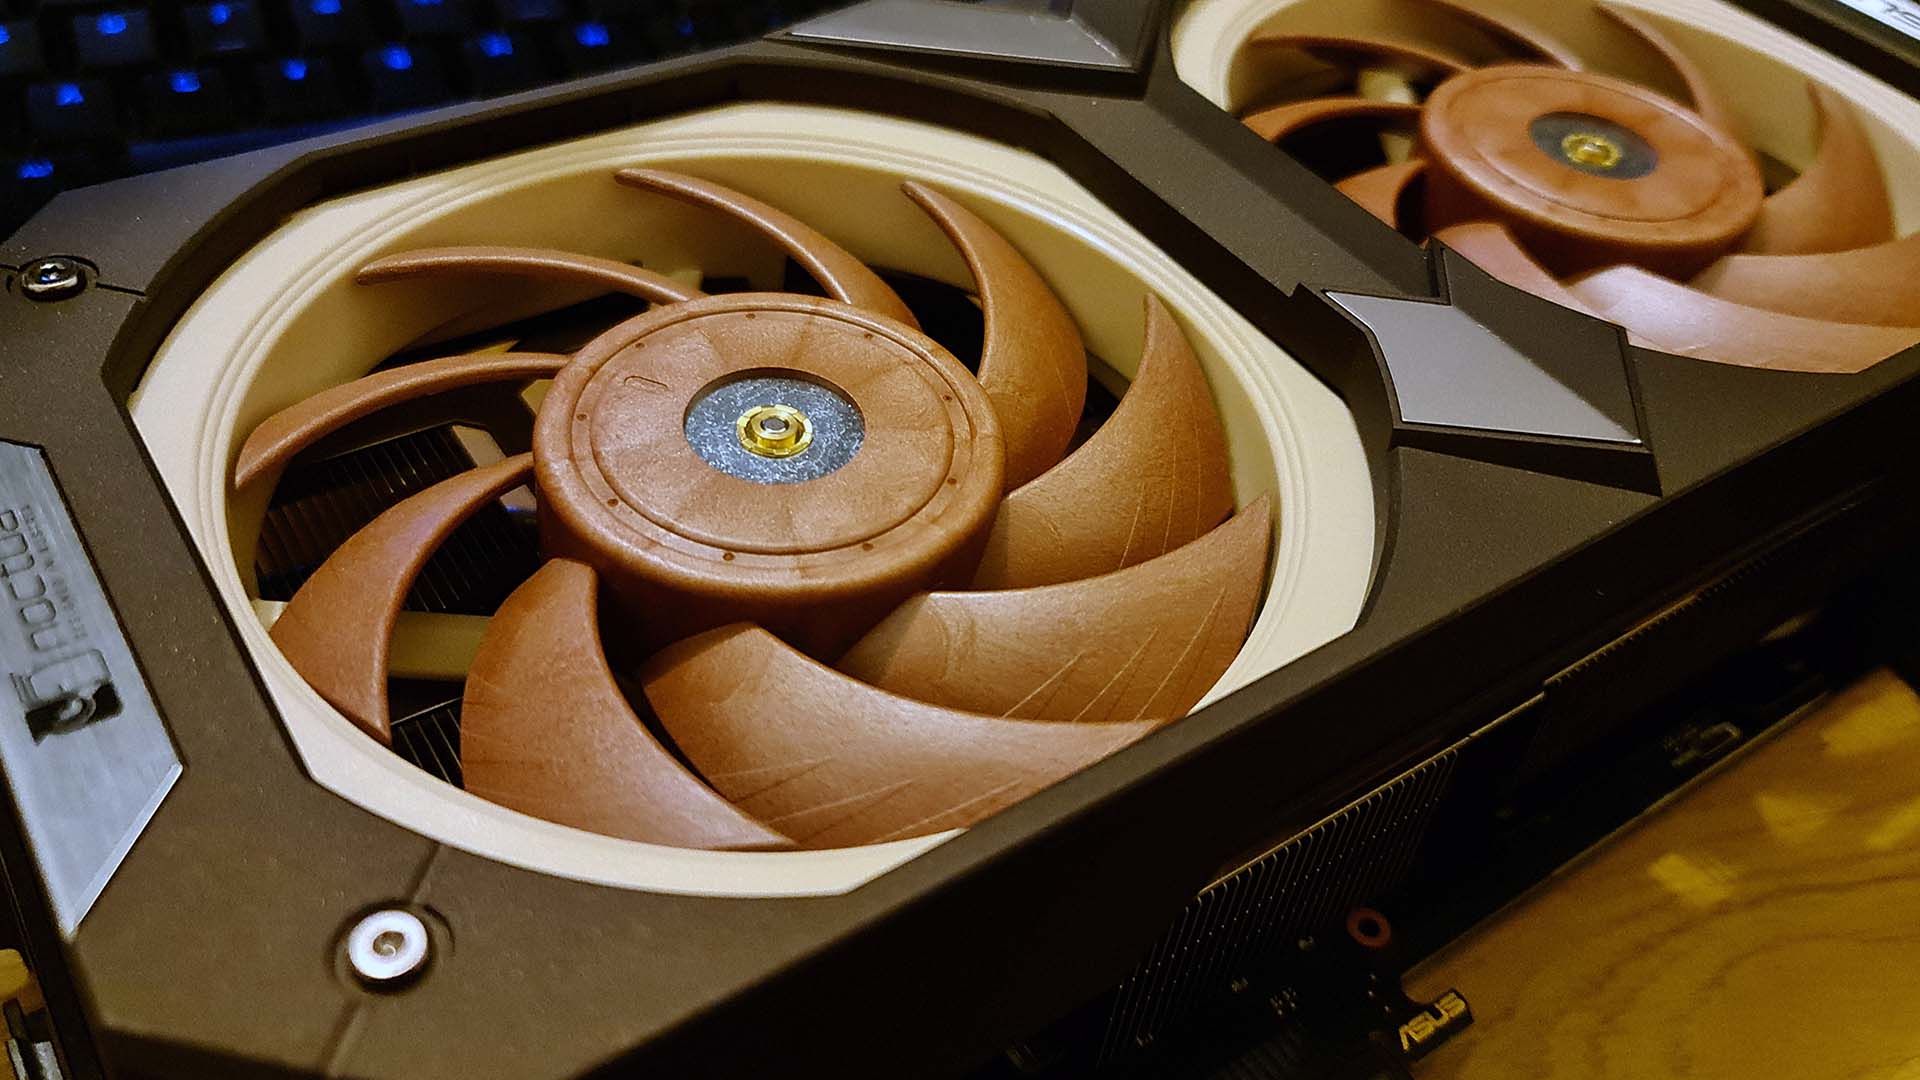  How much wood could a woodchuck chuck if a woodchuck could chuck wood-themed Noctua PC builds? 